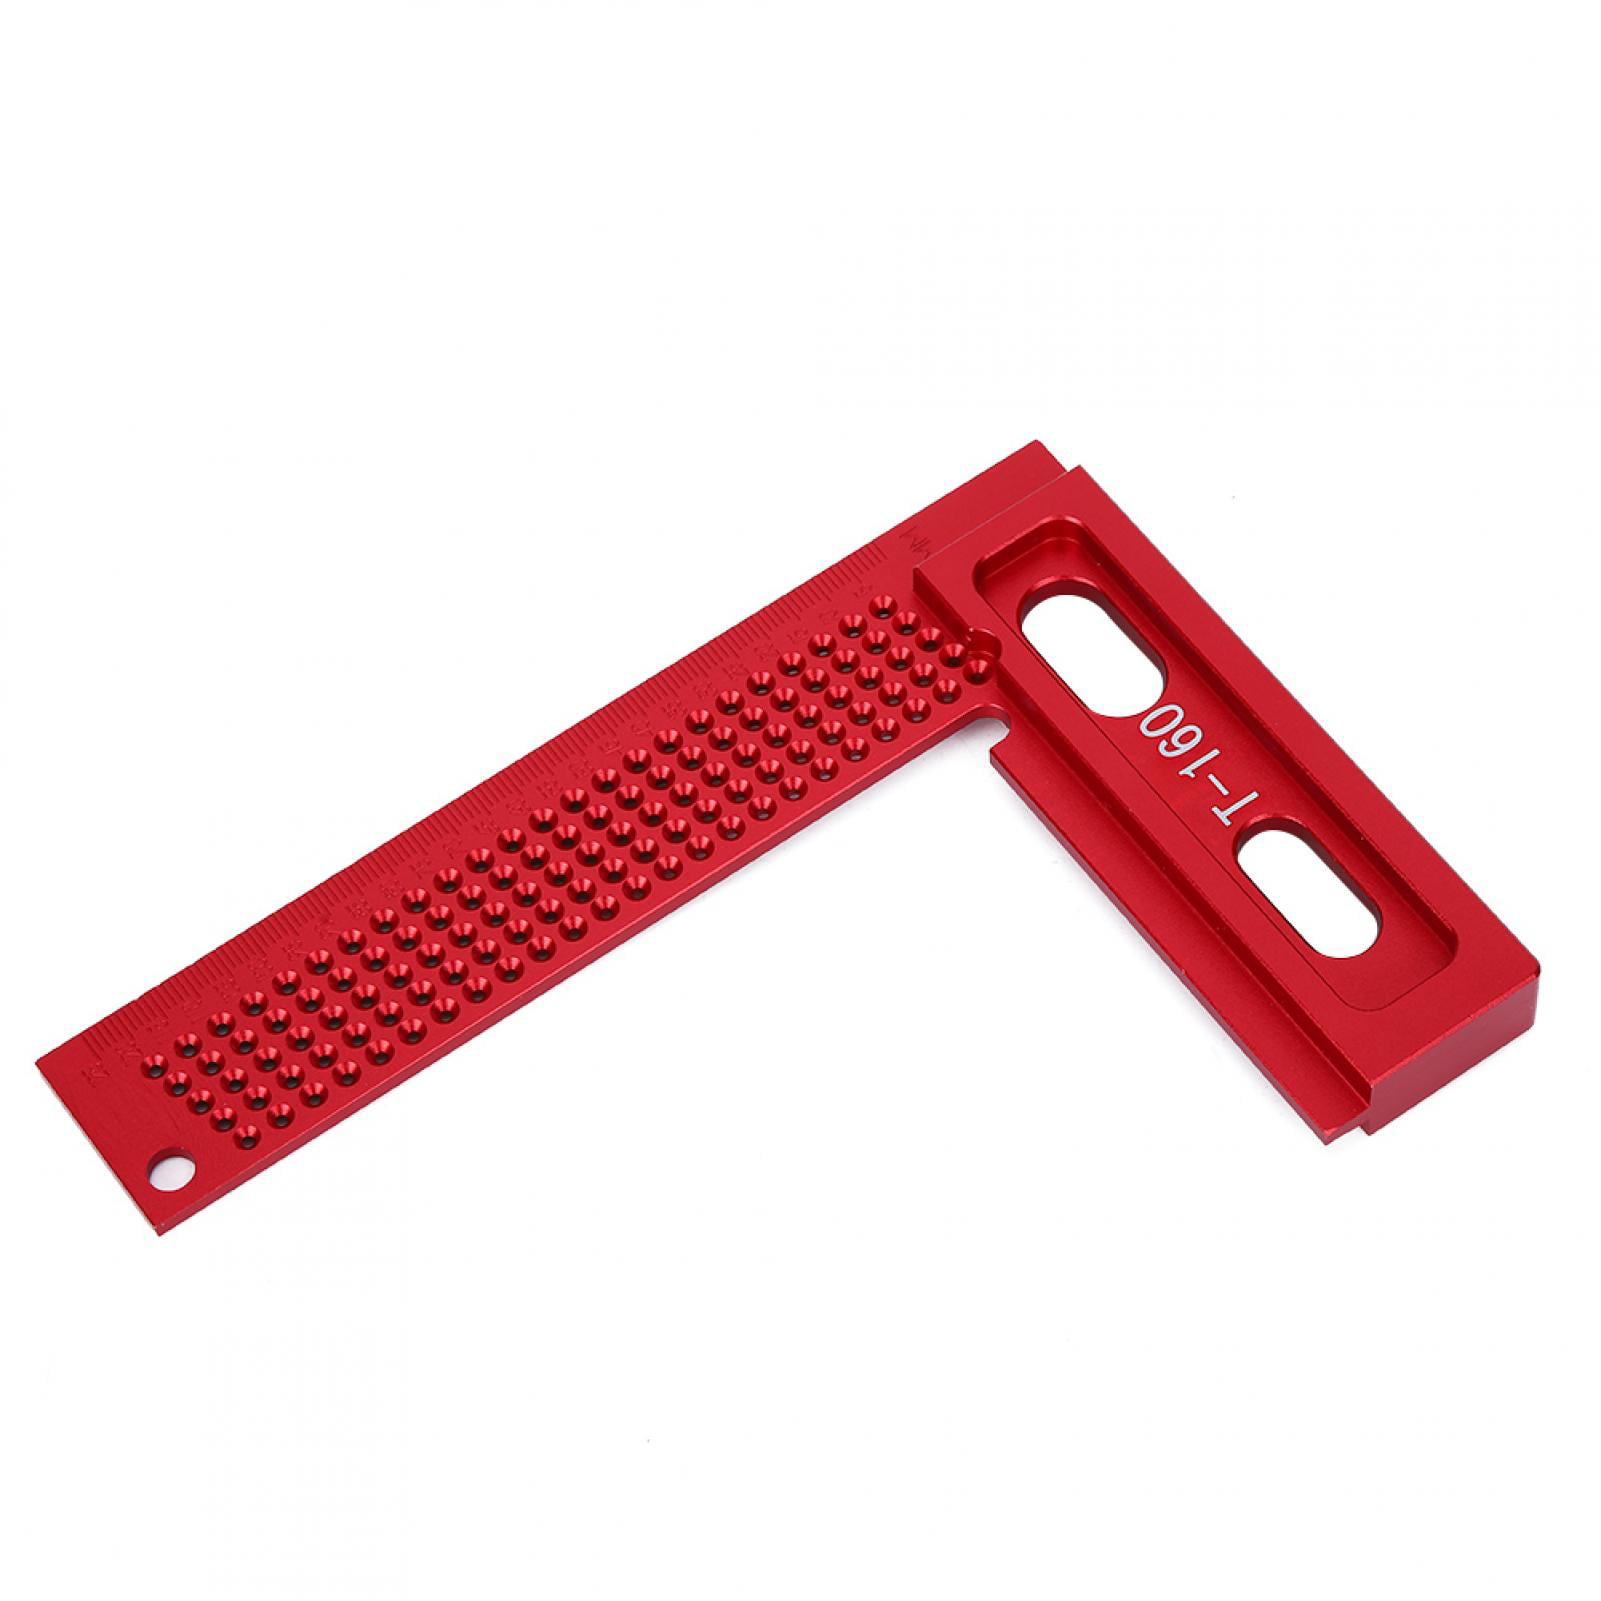 Rust‑Proof T‑Shaped Woodworking Accessory Wear‑Resistant Reasonable Structure Convenient Cnc Tool Processing For Carpenters Woodworking Ruler 